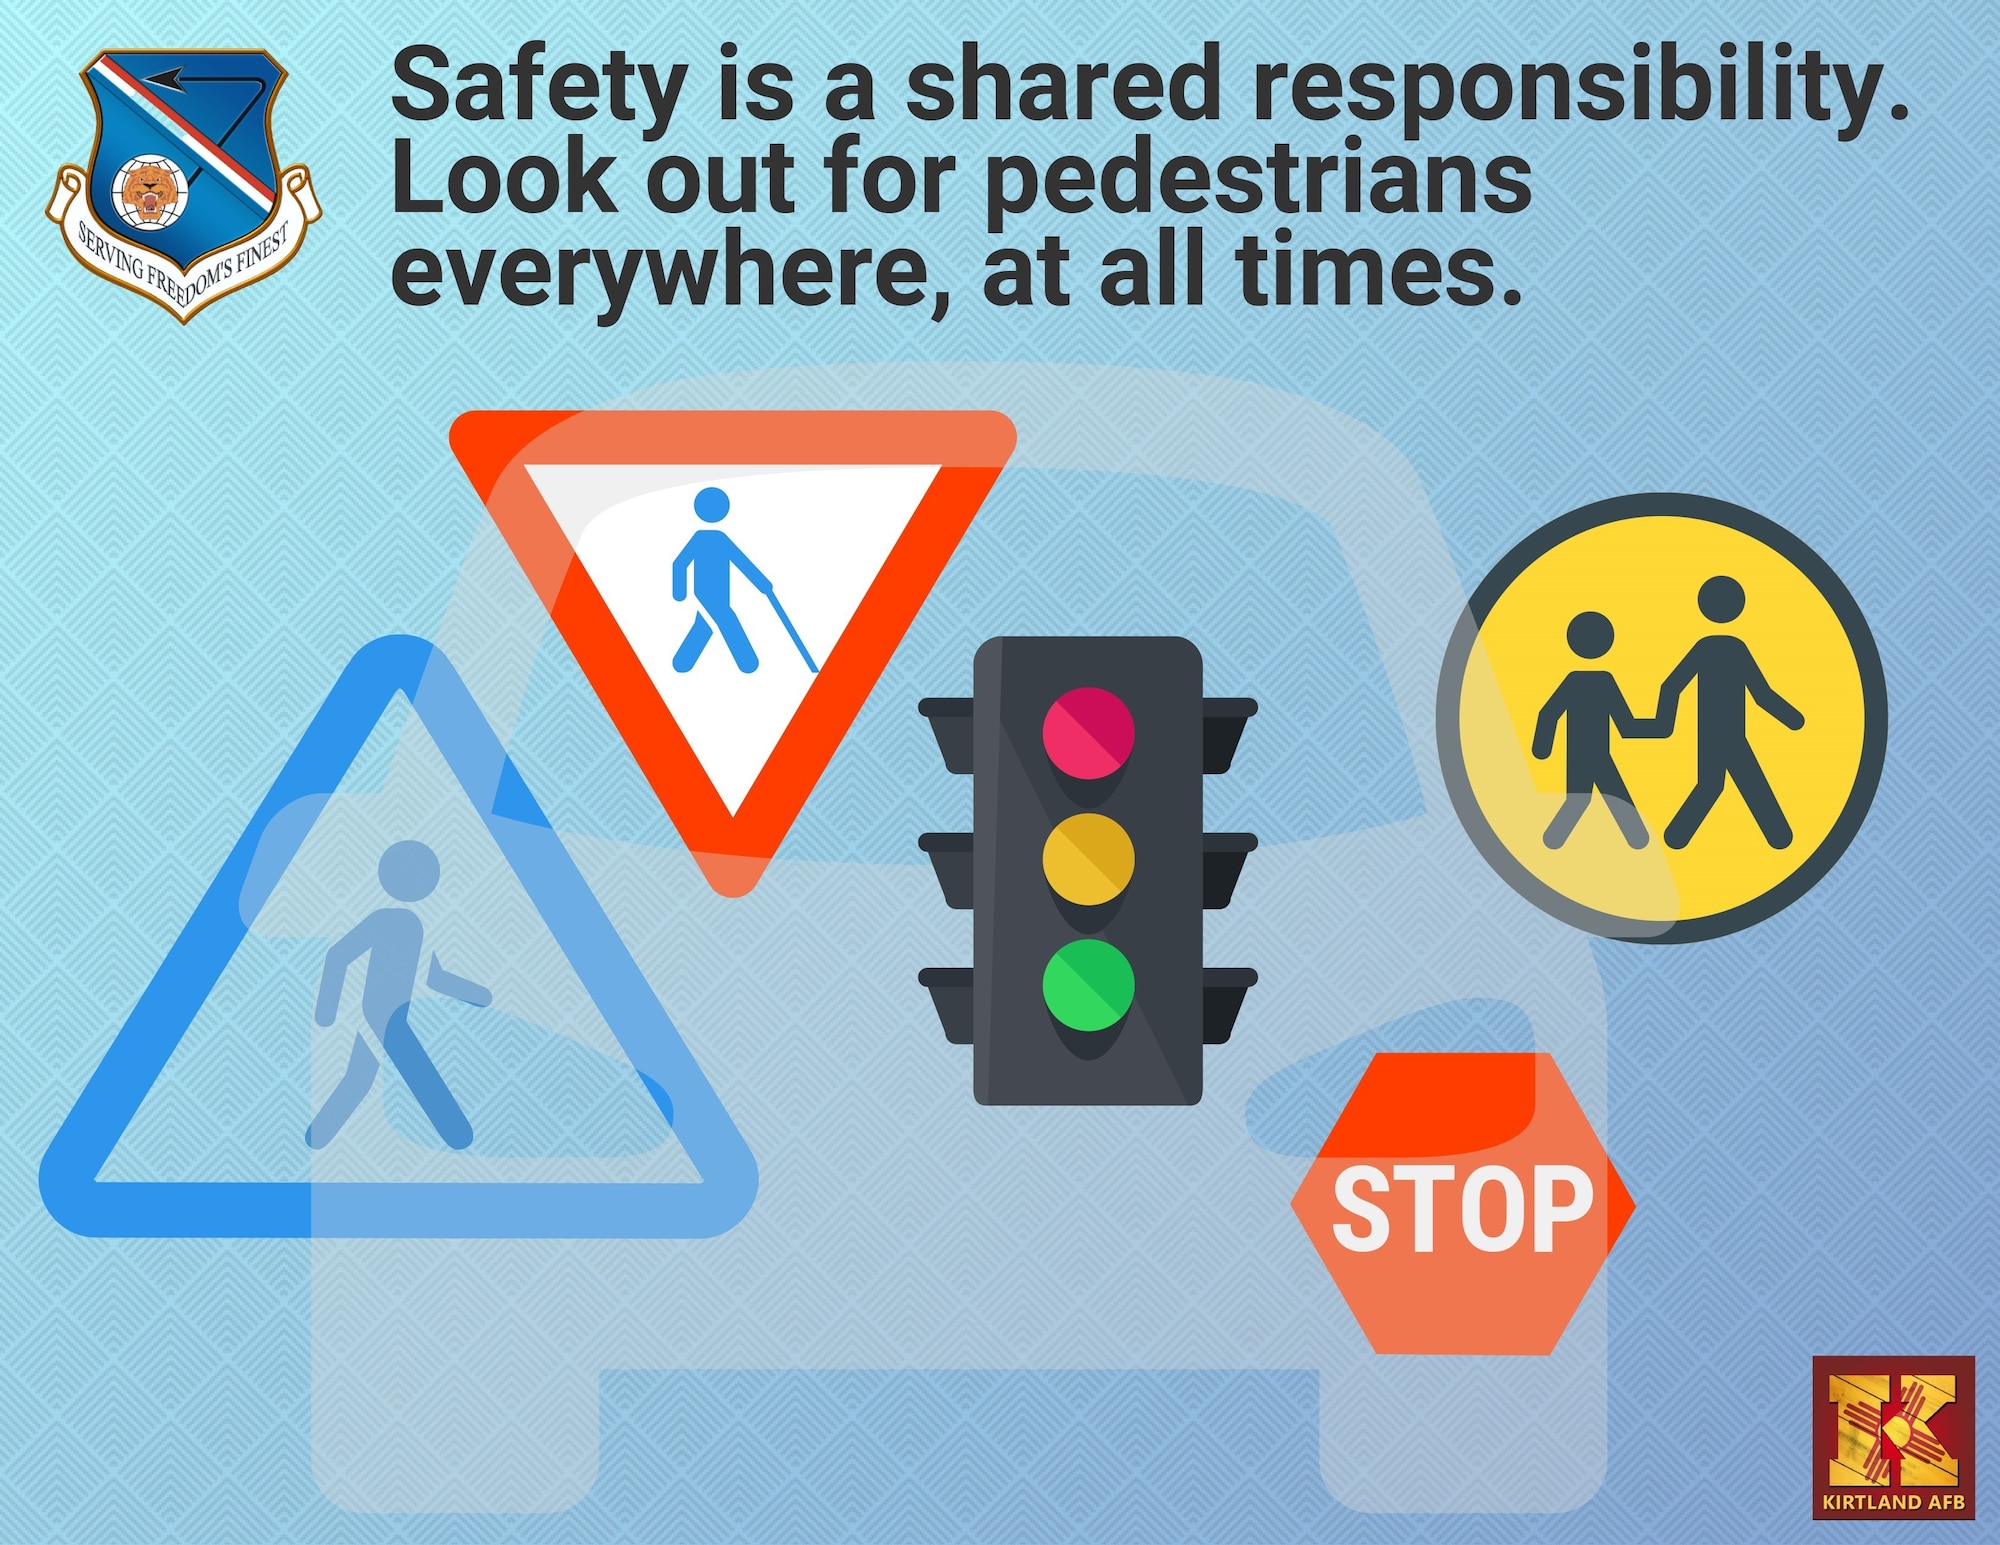 Graphic about pedestrian safety